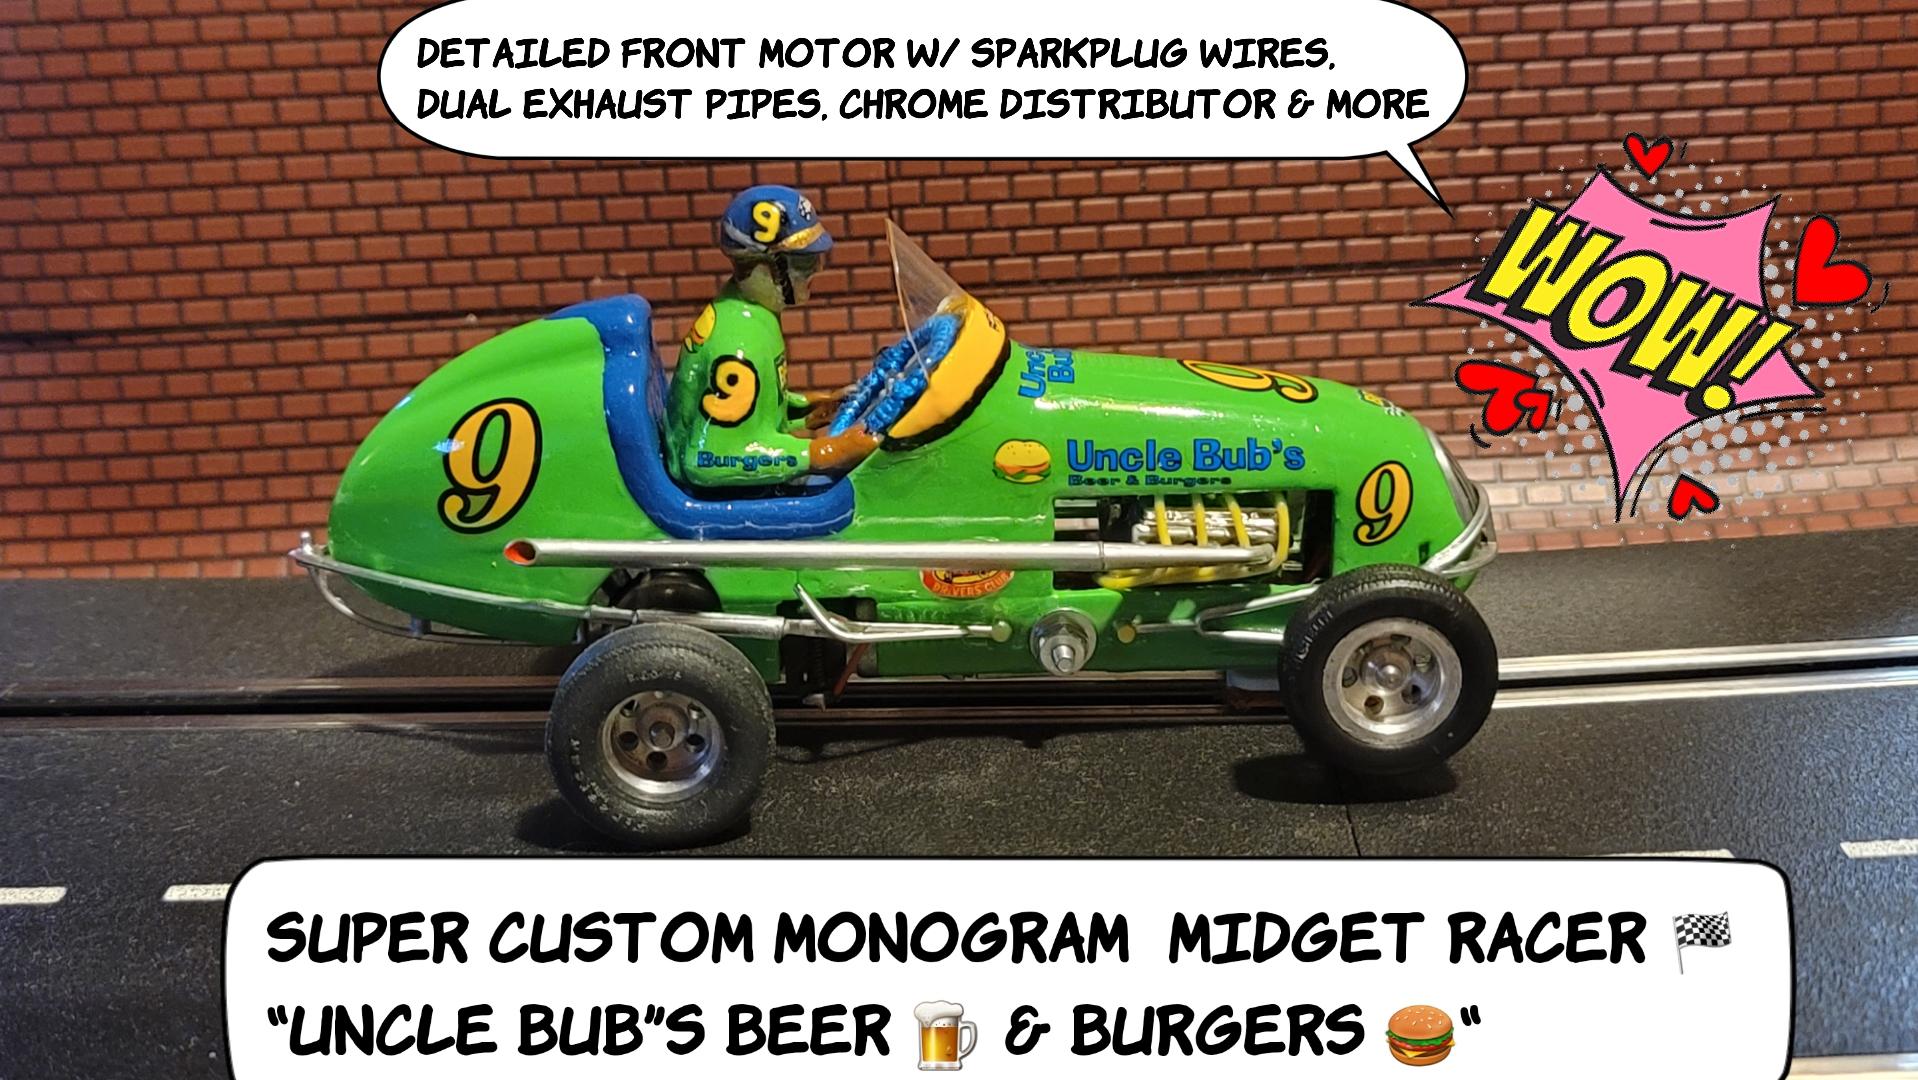 * THIS WEEKEND ONLY * Black Friday Super Sale, Save $100 off our Ebay $349.99 Store Sale Price * Monogram Midget Racer “Uncle Bubs Beer & Burgers” Racing Special 1/24 Scale Slot Car 9